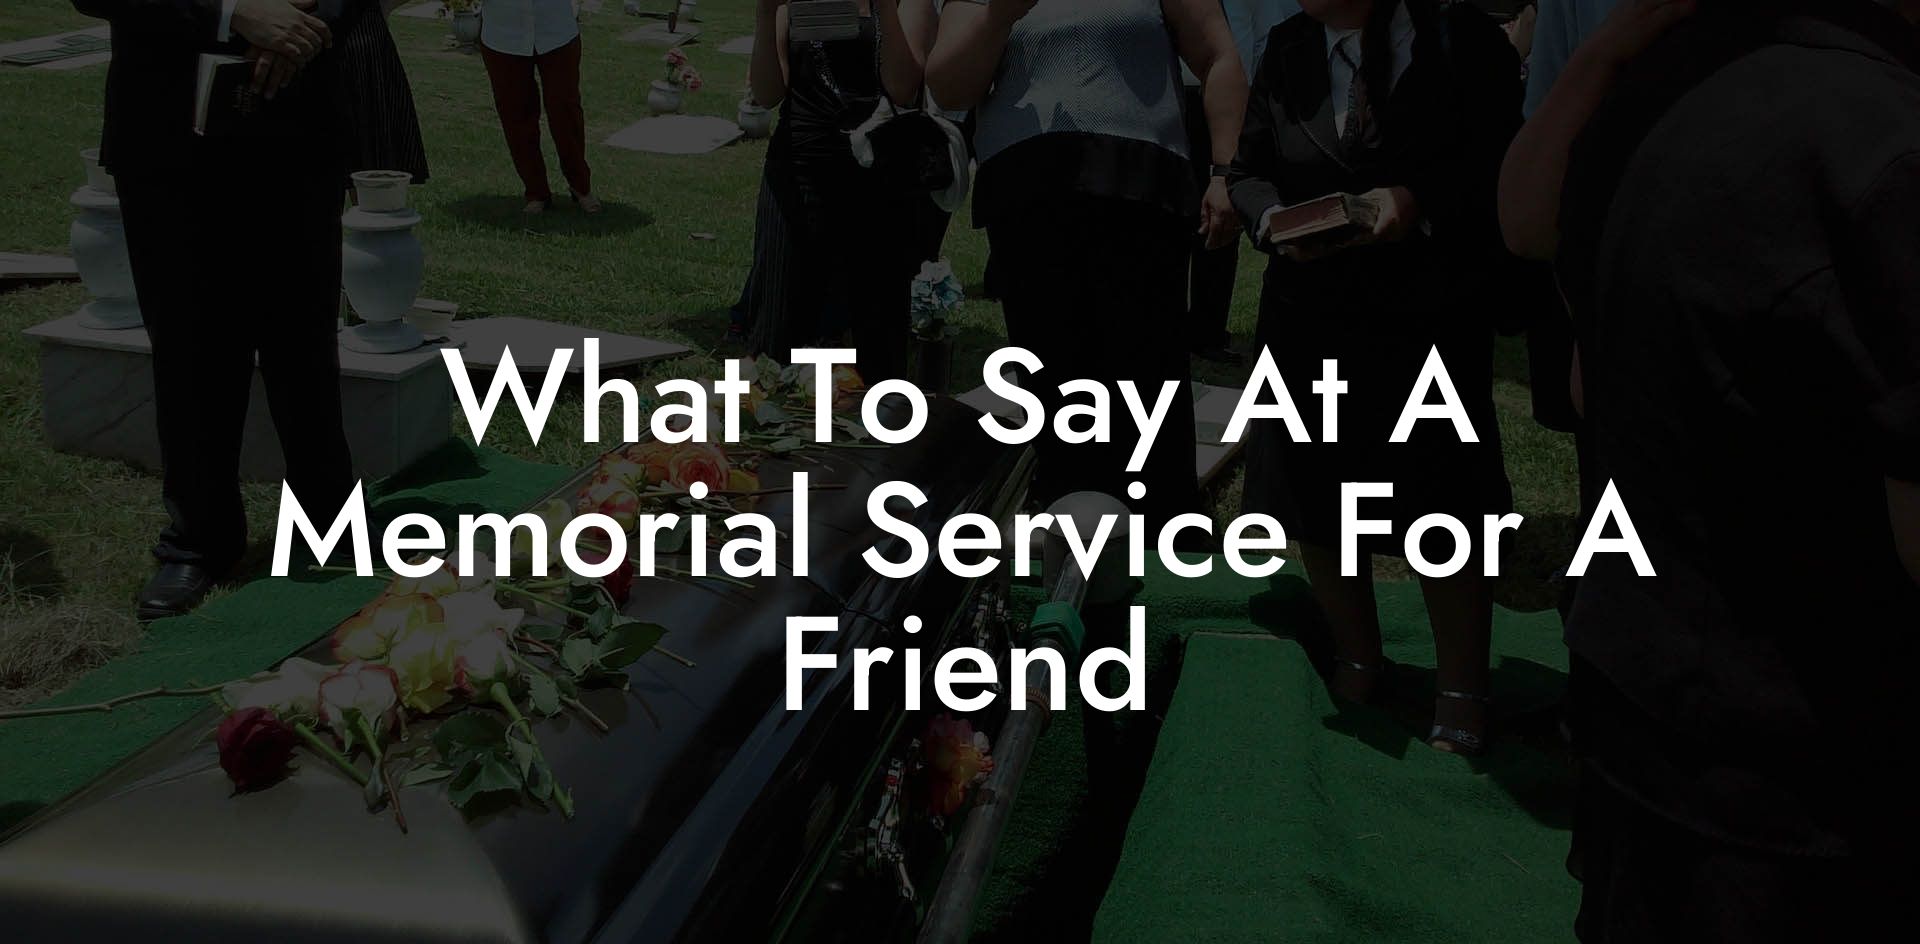 What To Say At A Memorial Service For A Friend